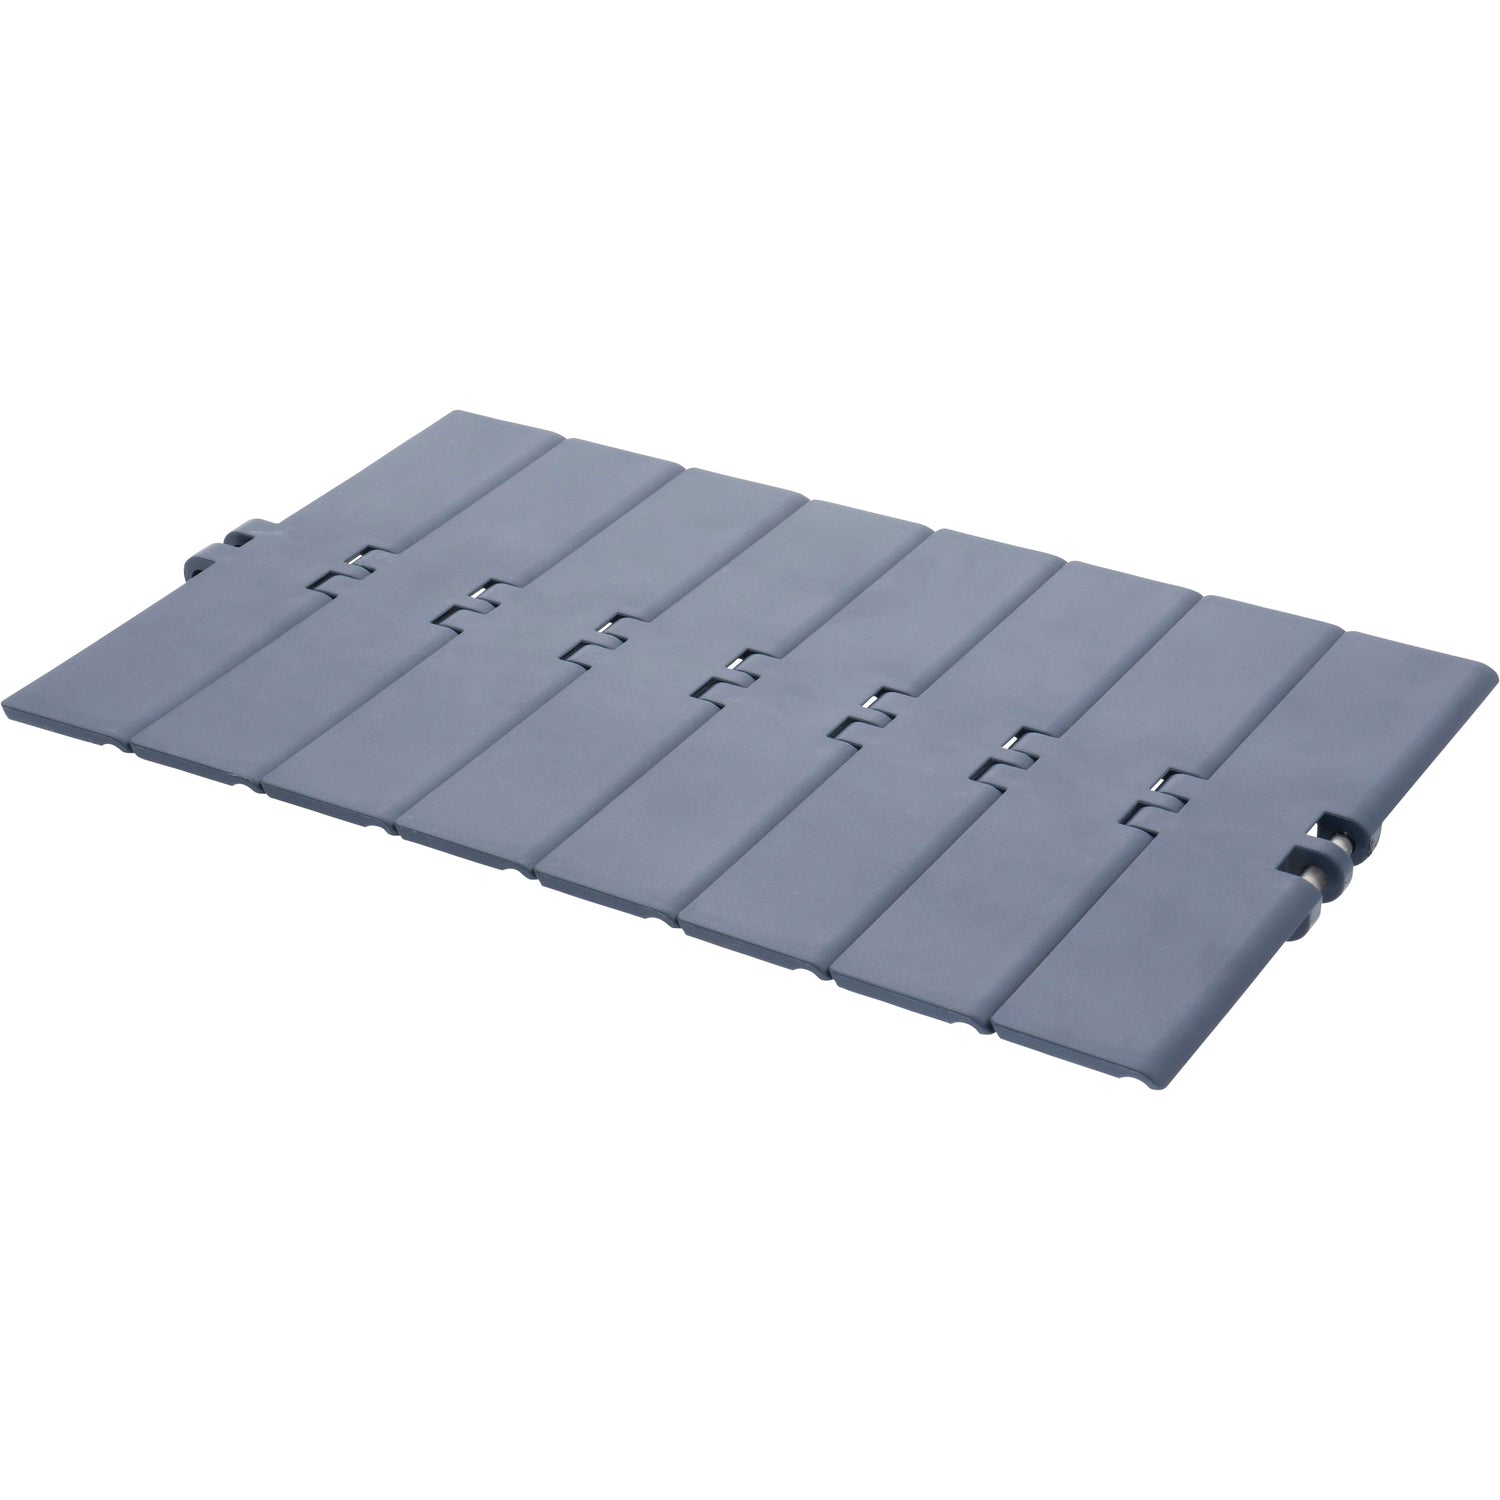 1 foot section of navy blue conveyor track on white background. NGE-820-K750